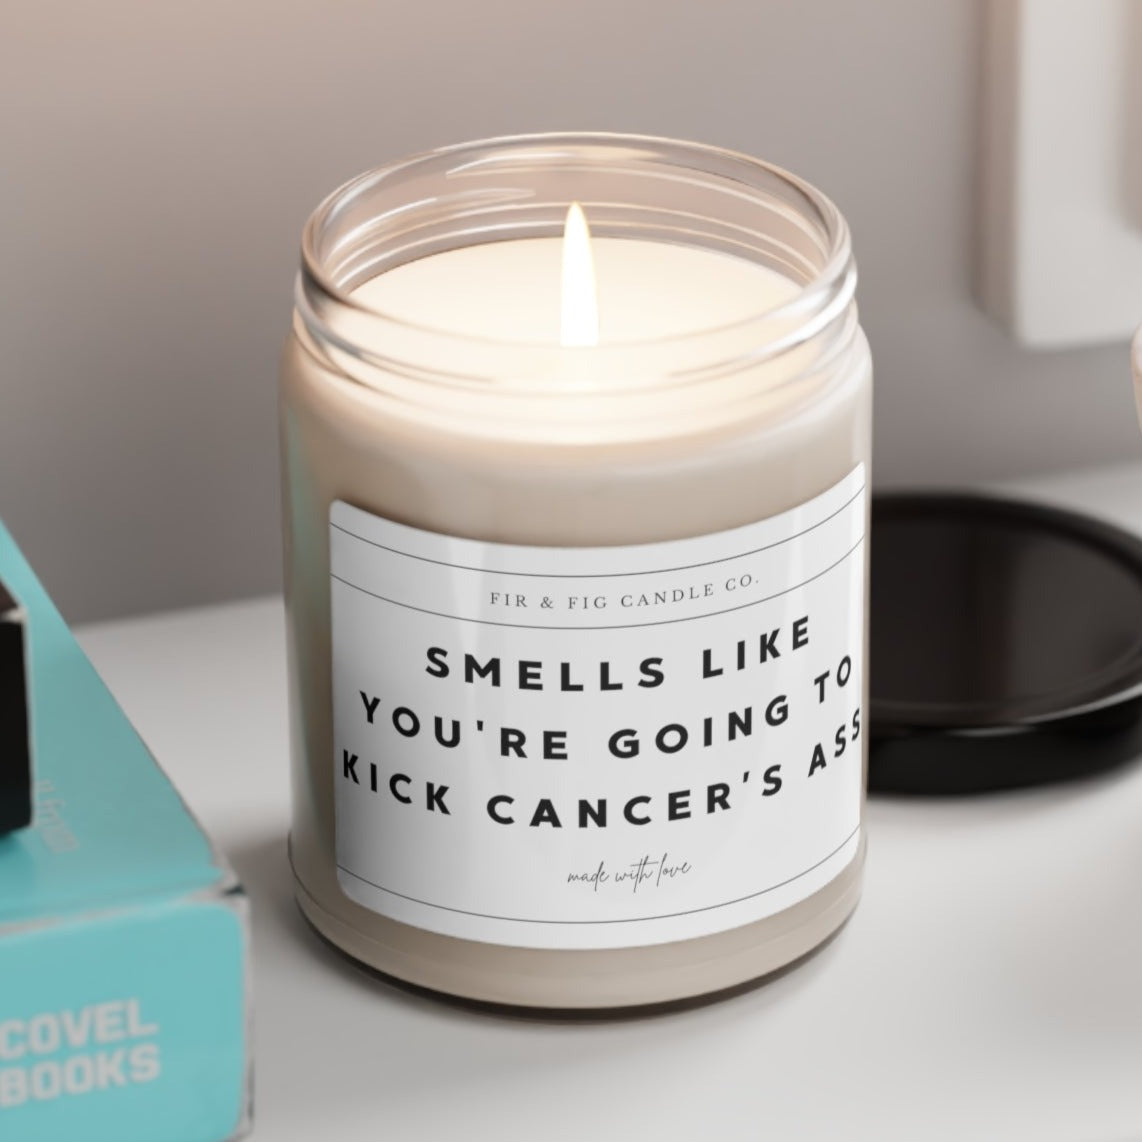 Smells Like You're Going To Kick CANCERS Ass candle, Eco-Friendly 100% Soy Candle, 9oz, Cancer Survivor, Cancer Awareness, gift for her